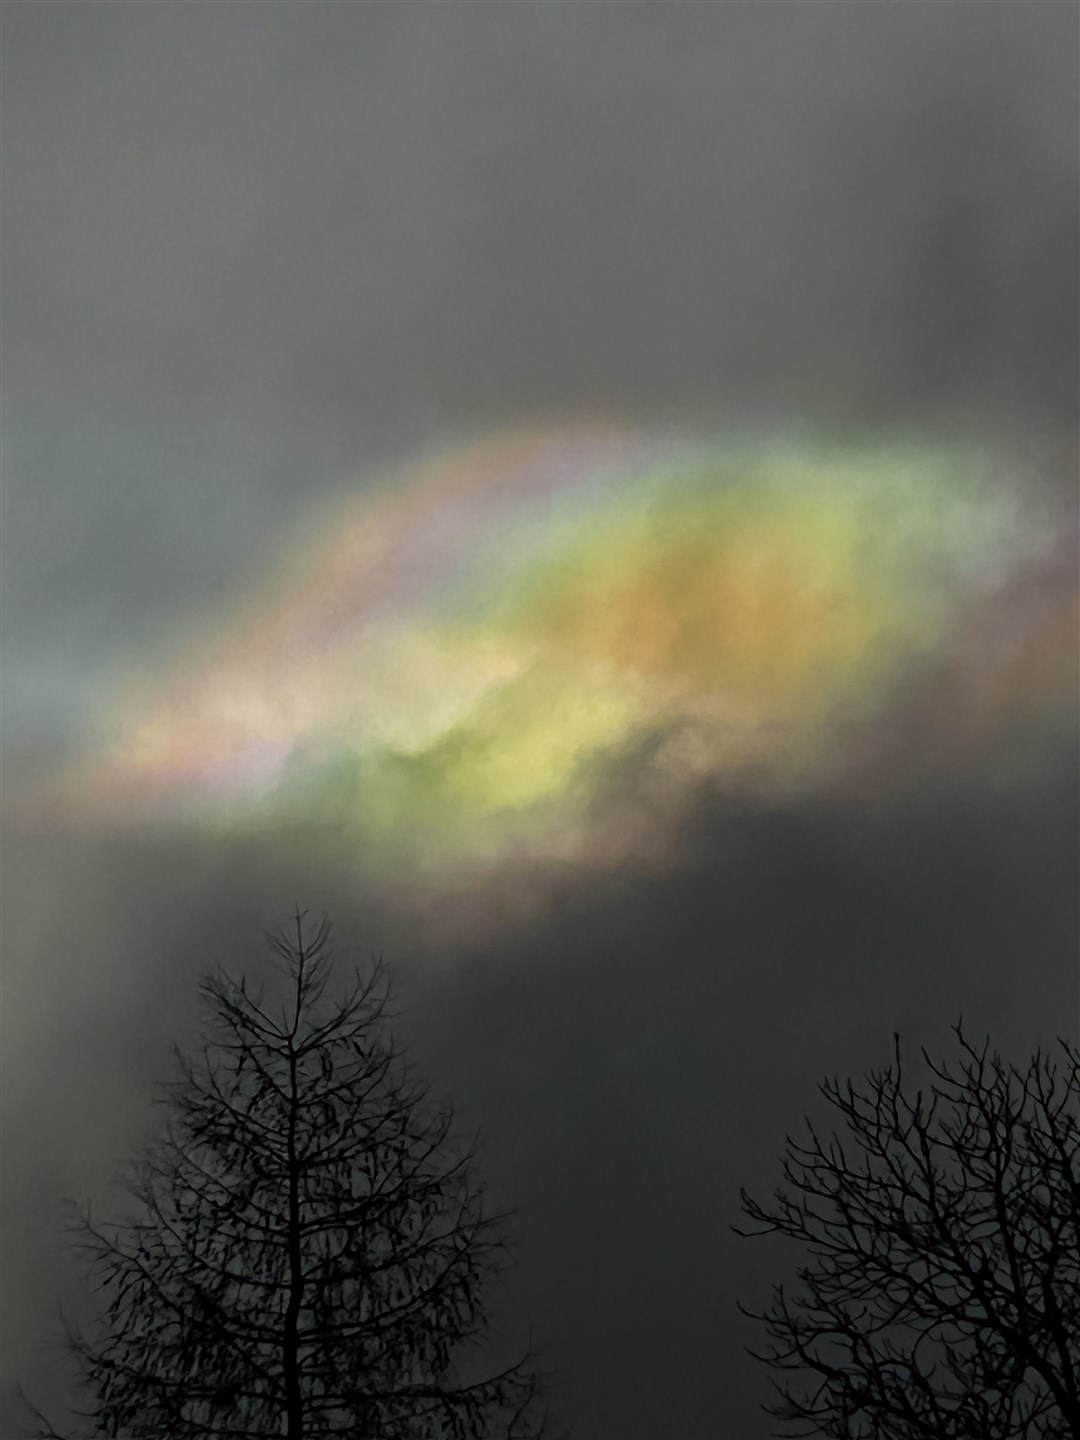 Spooky sighting. Mr Hazlegreaves explained: "This a still image from last night. It was very surreal and ethereal because the very thin stratus cloud was letting the colours through. The video was from a few minutes later after the low cloud cleared revealing the high nacreous clouds."